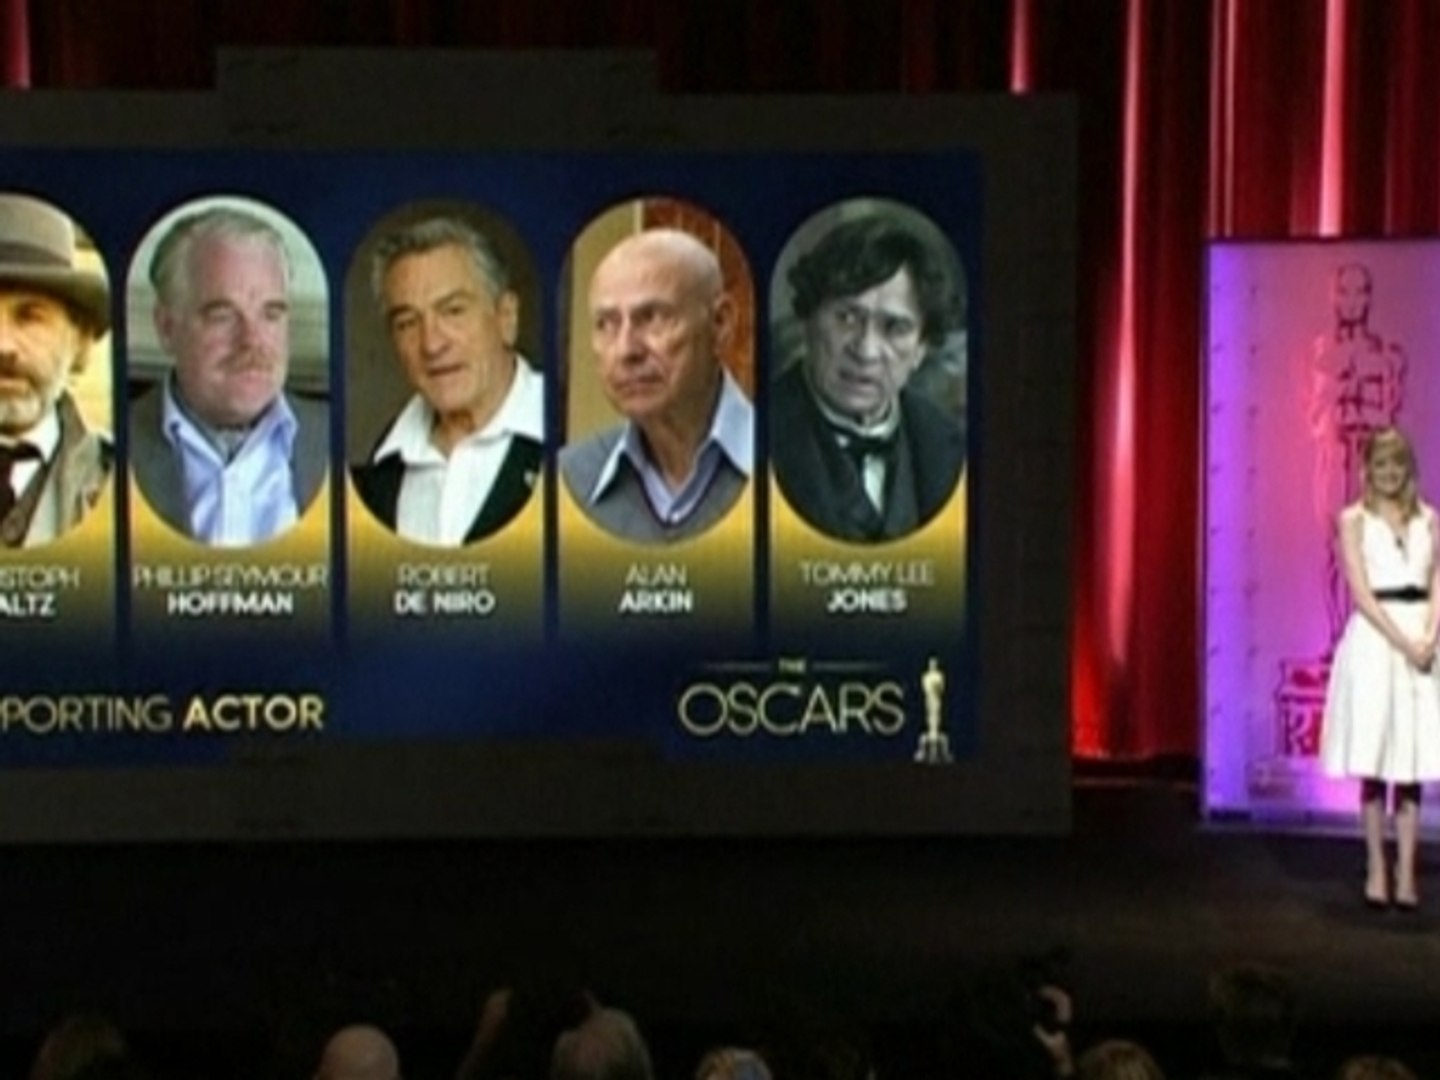 Oscars picks for best supporting actor and actress